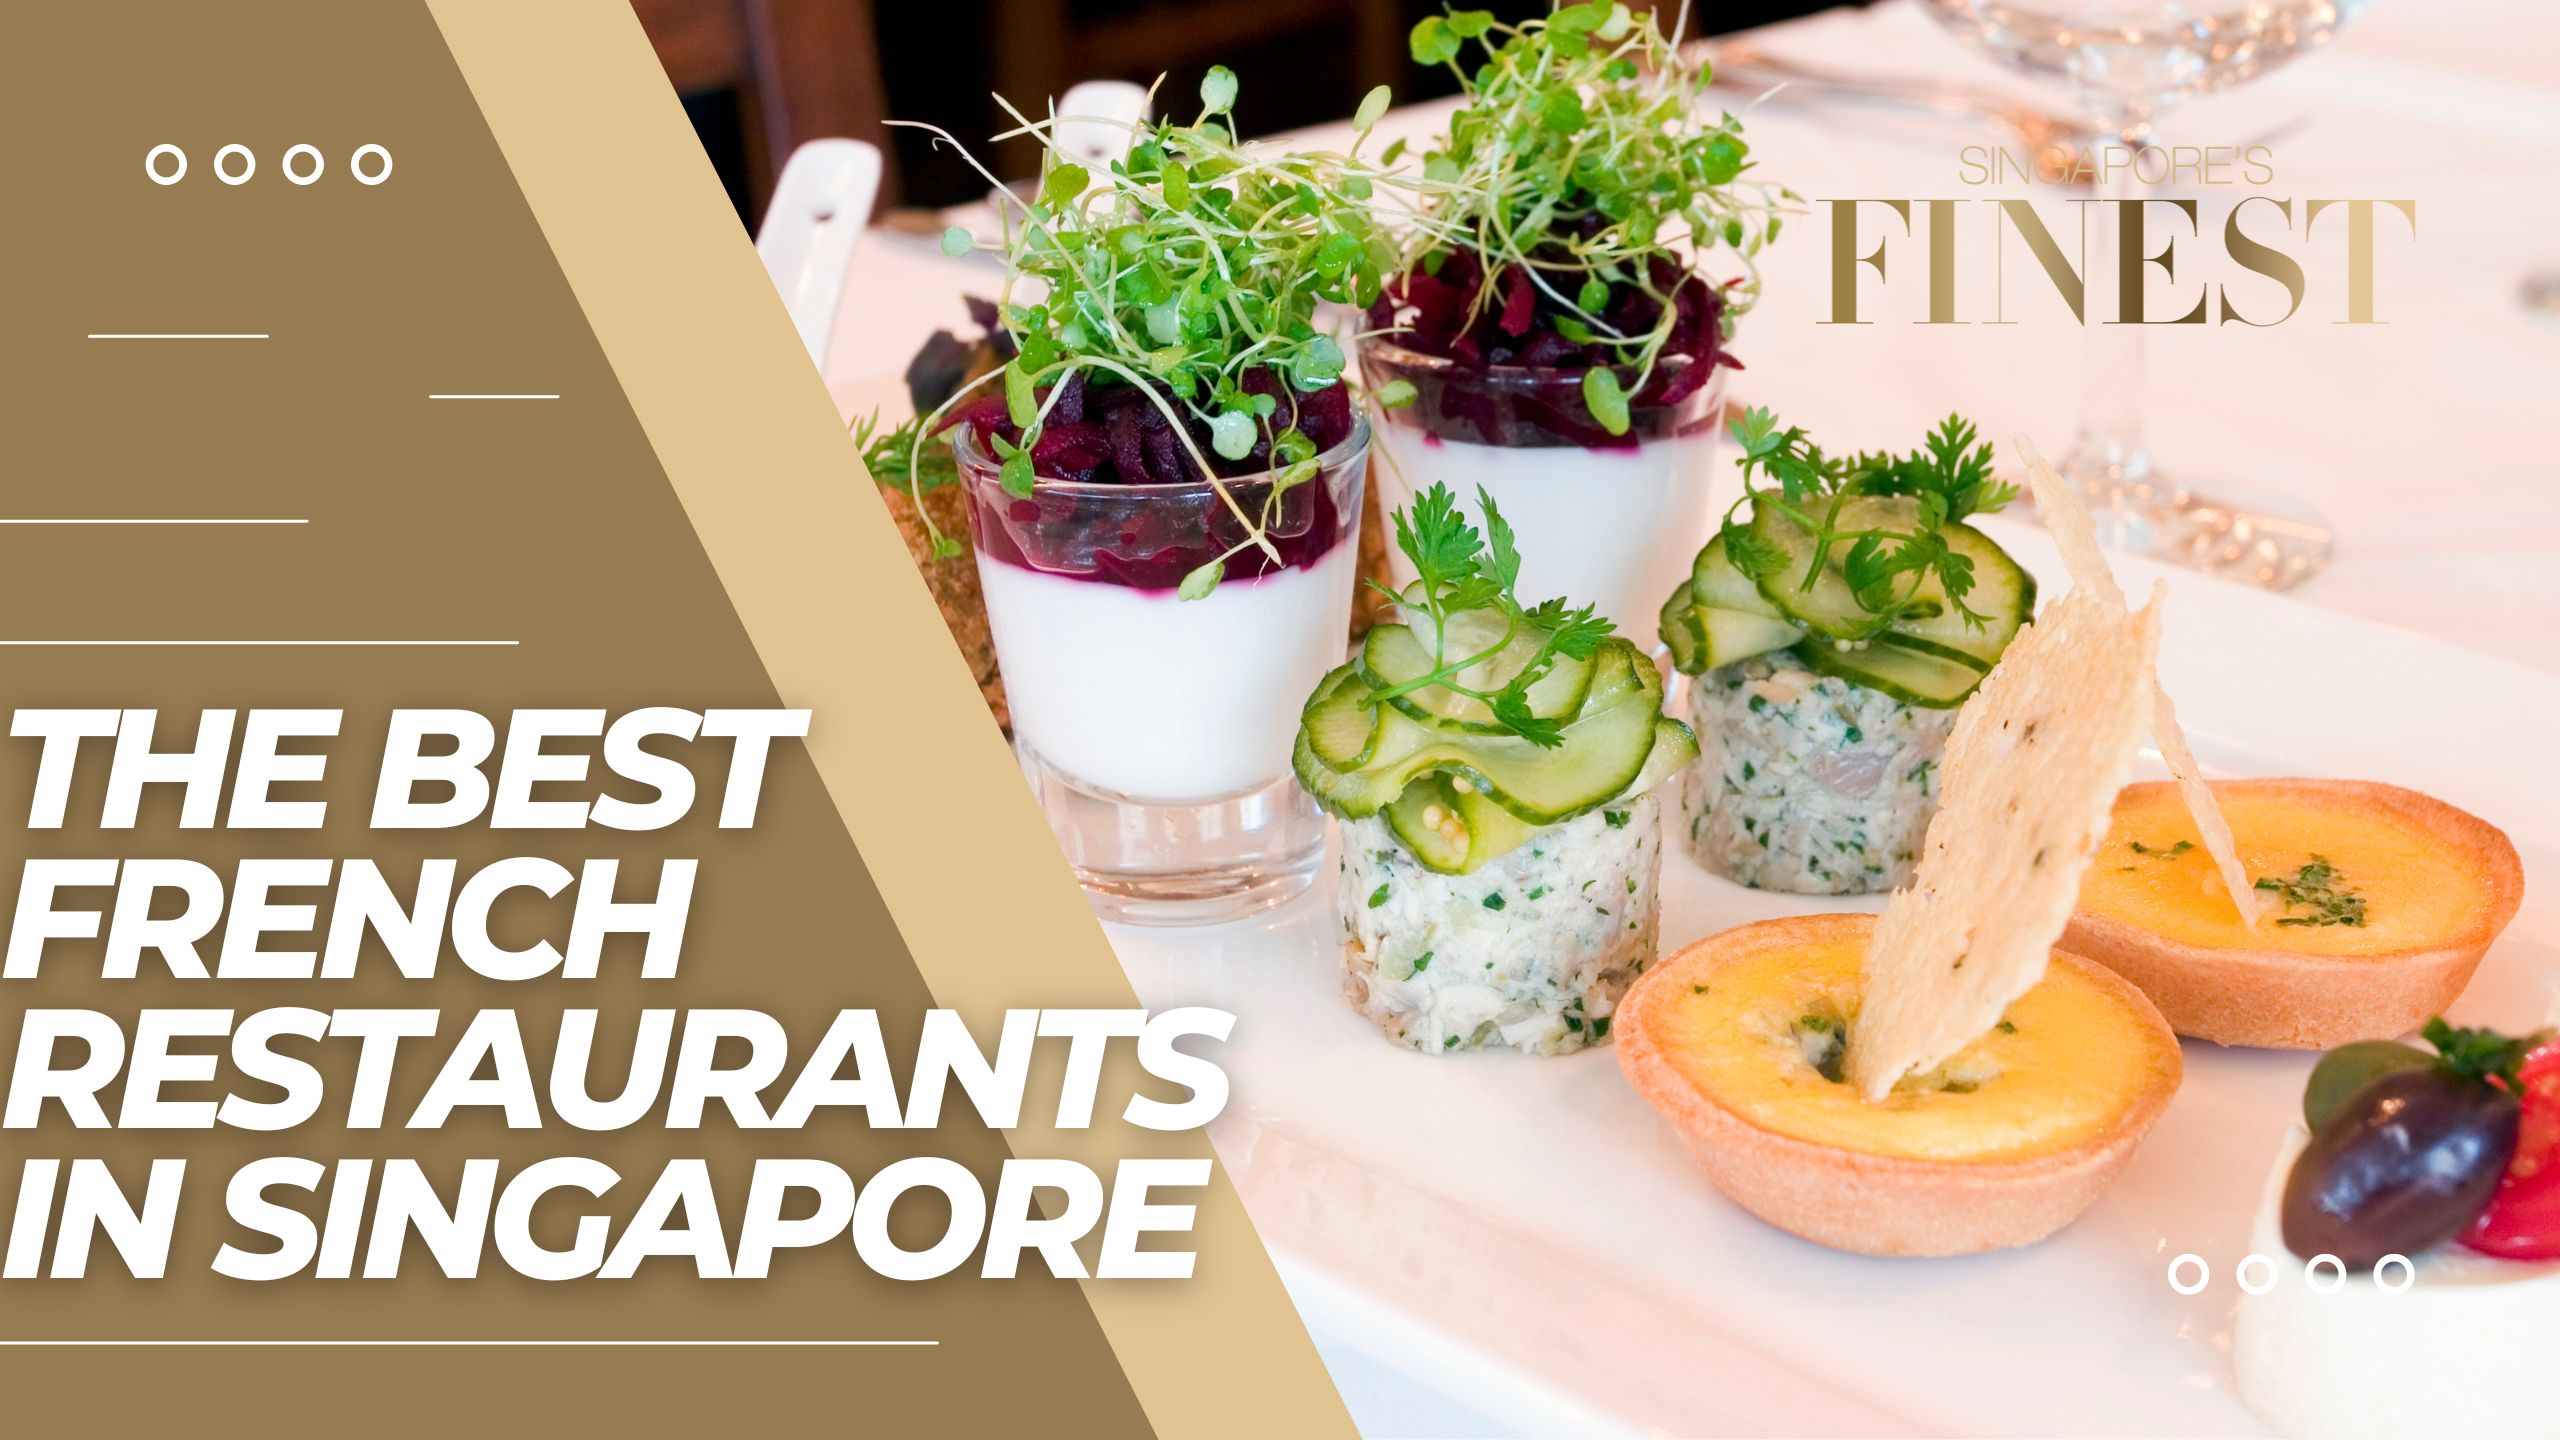 The Finest French Restaurants in Singapore